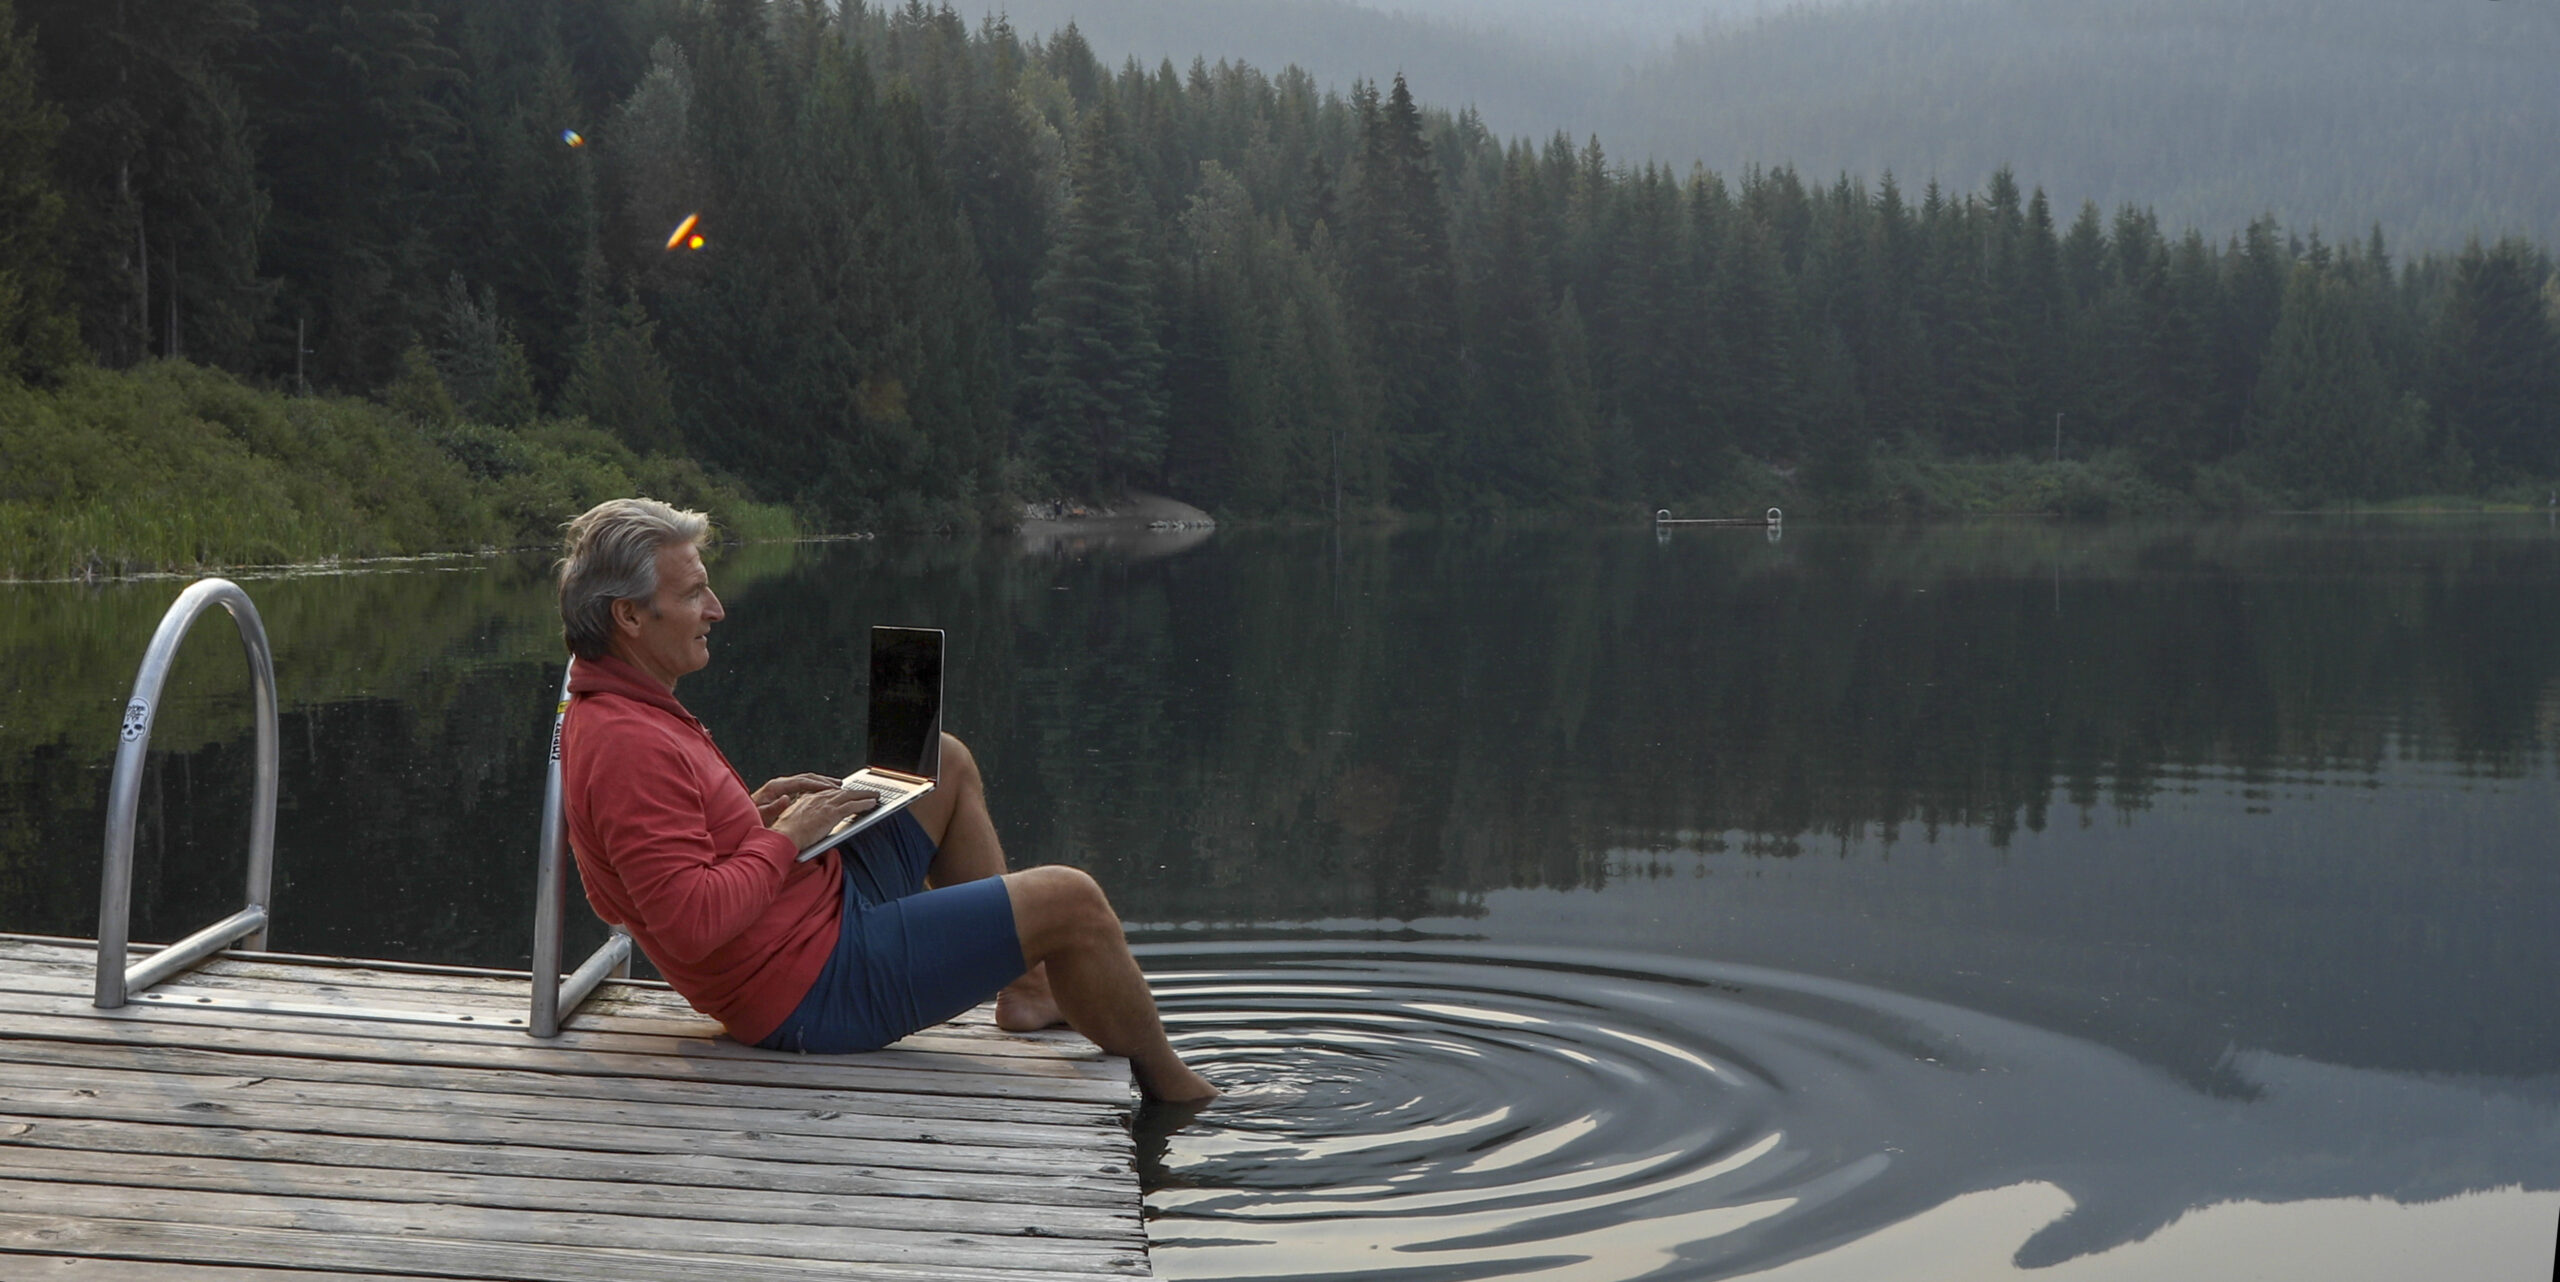 Mature man pauses on wooden pier, looks out across lake.He uses laptop computer. Lost Lake, Whistler, BC